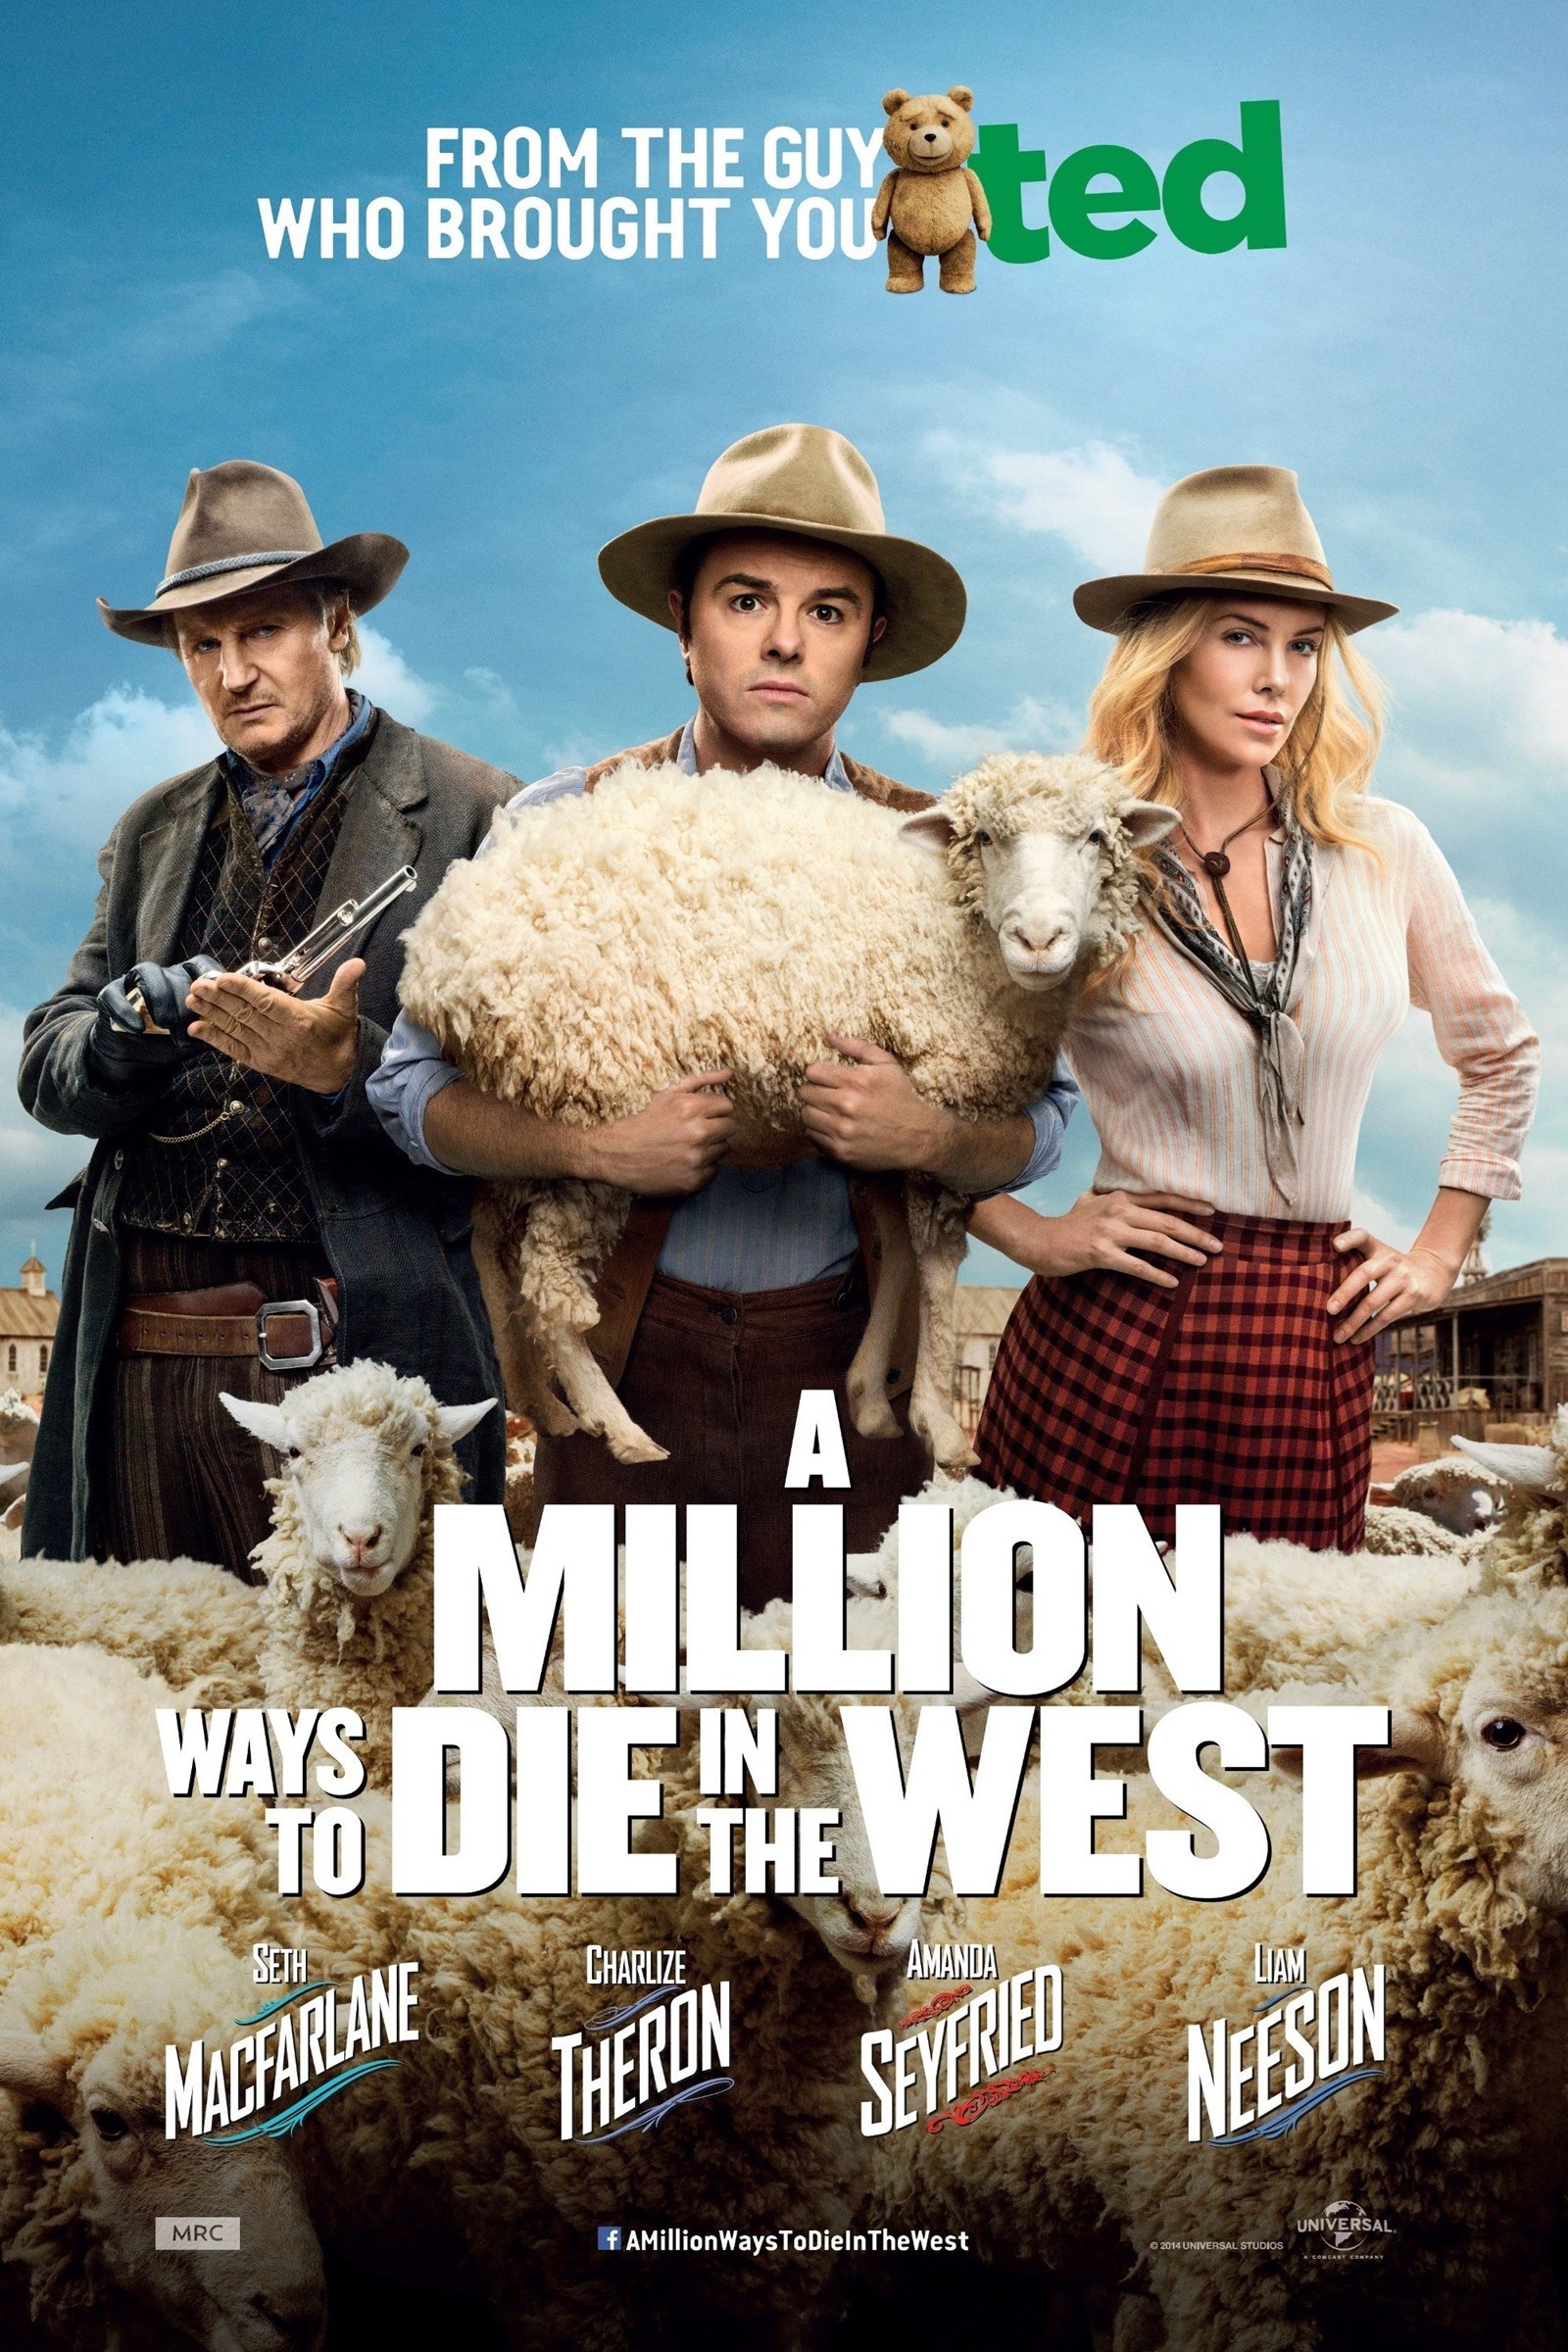 A Million Ways To Die In The West Backgrounds, Compatible - PC, Mobile, Gadgets| 1600x2400 px